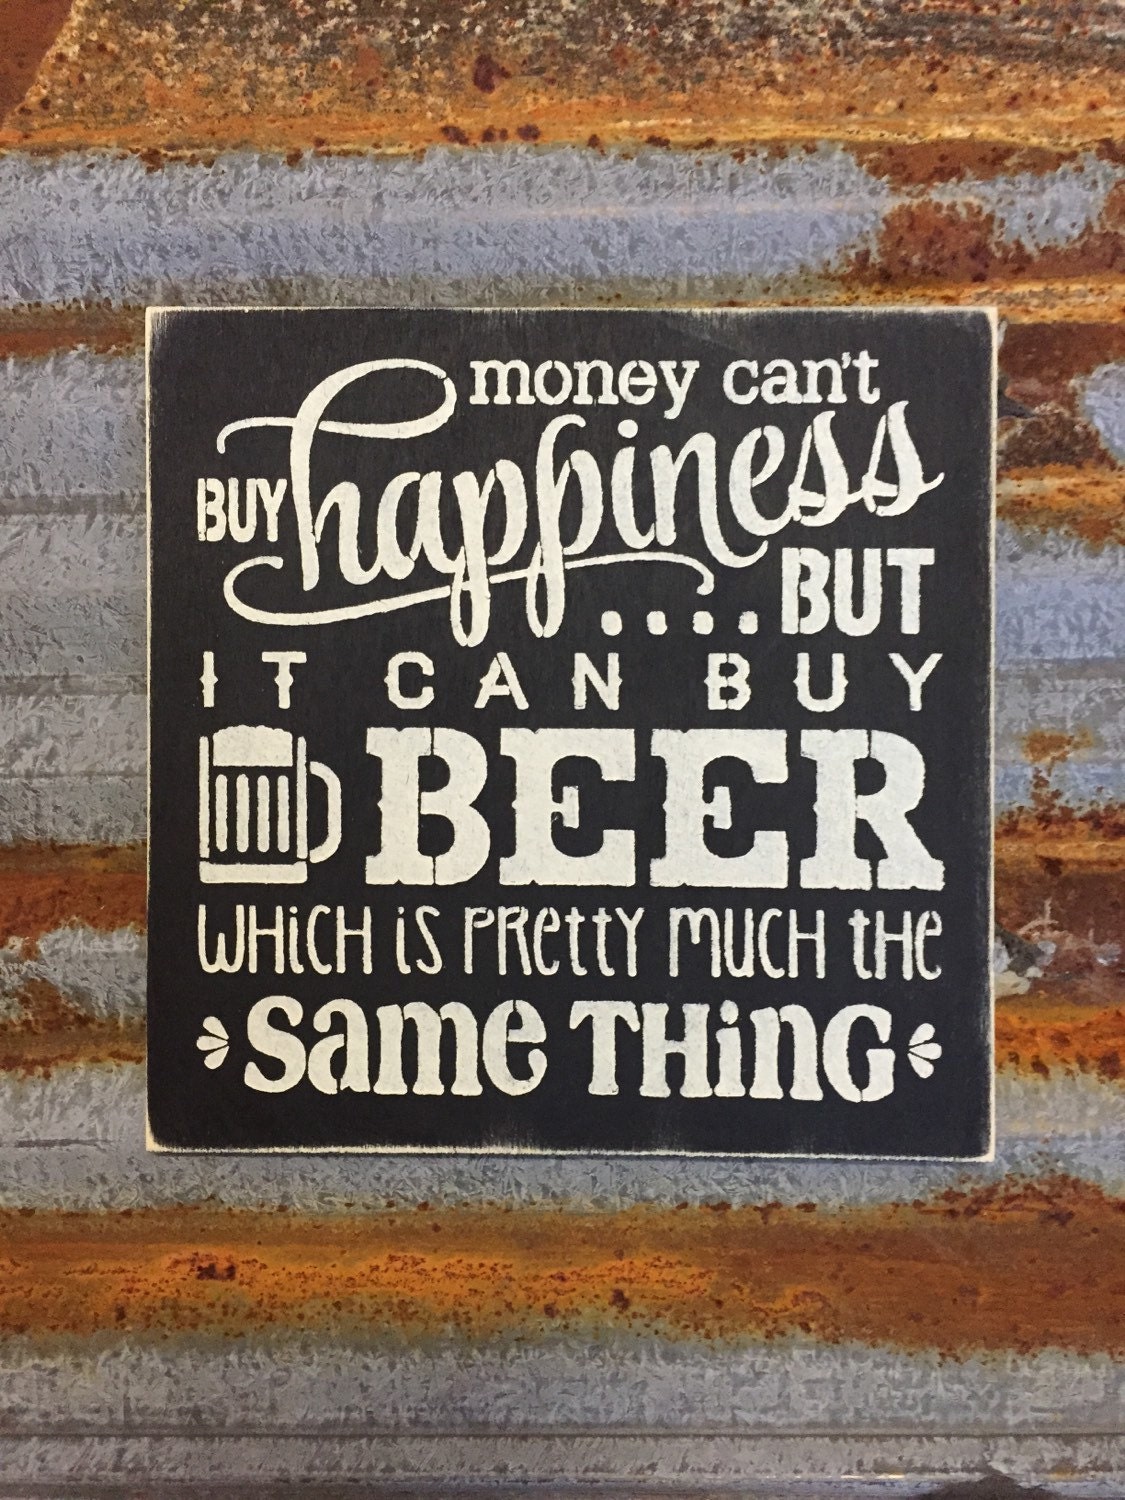 Money Can't Buy Happiness But it Can Buy Beer Handmade